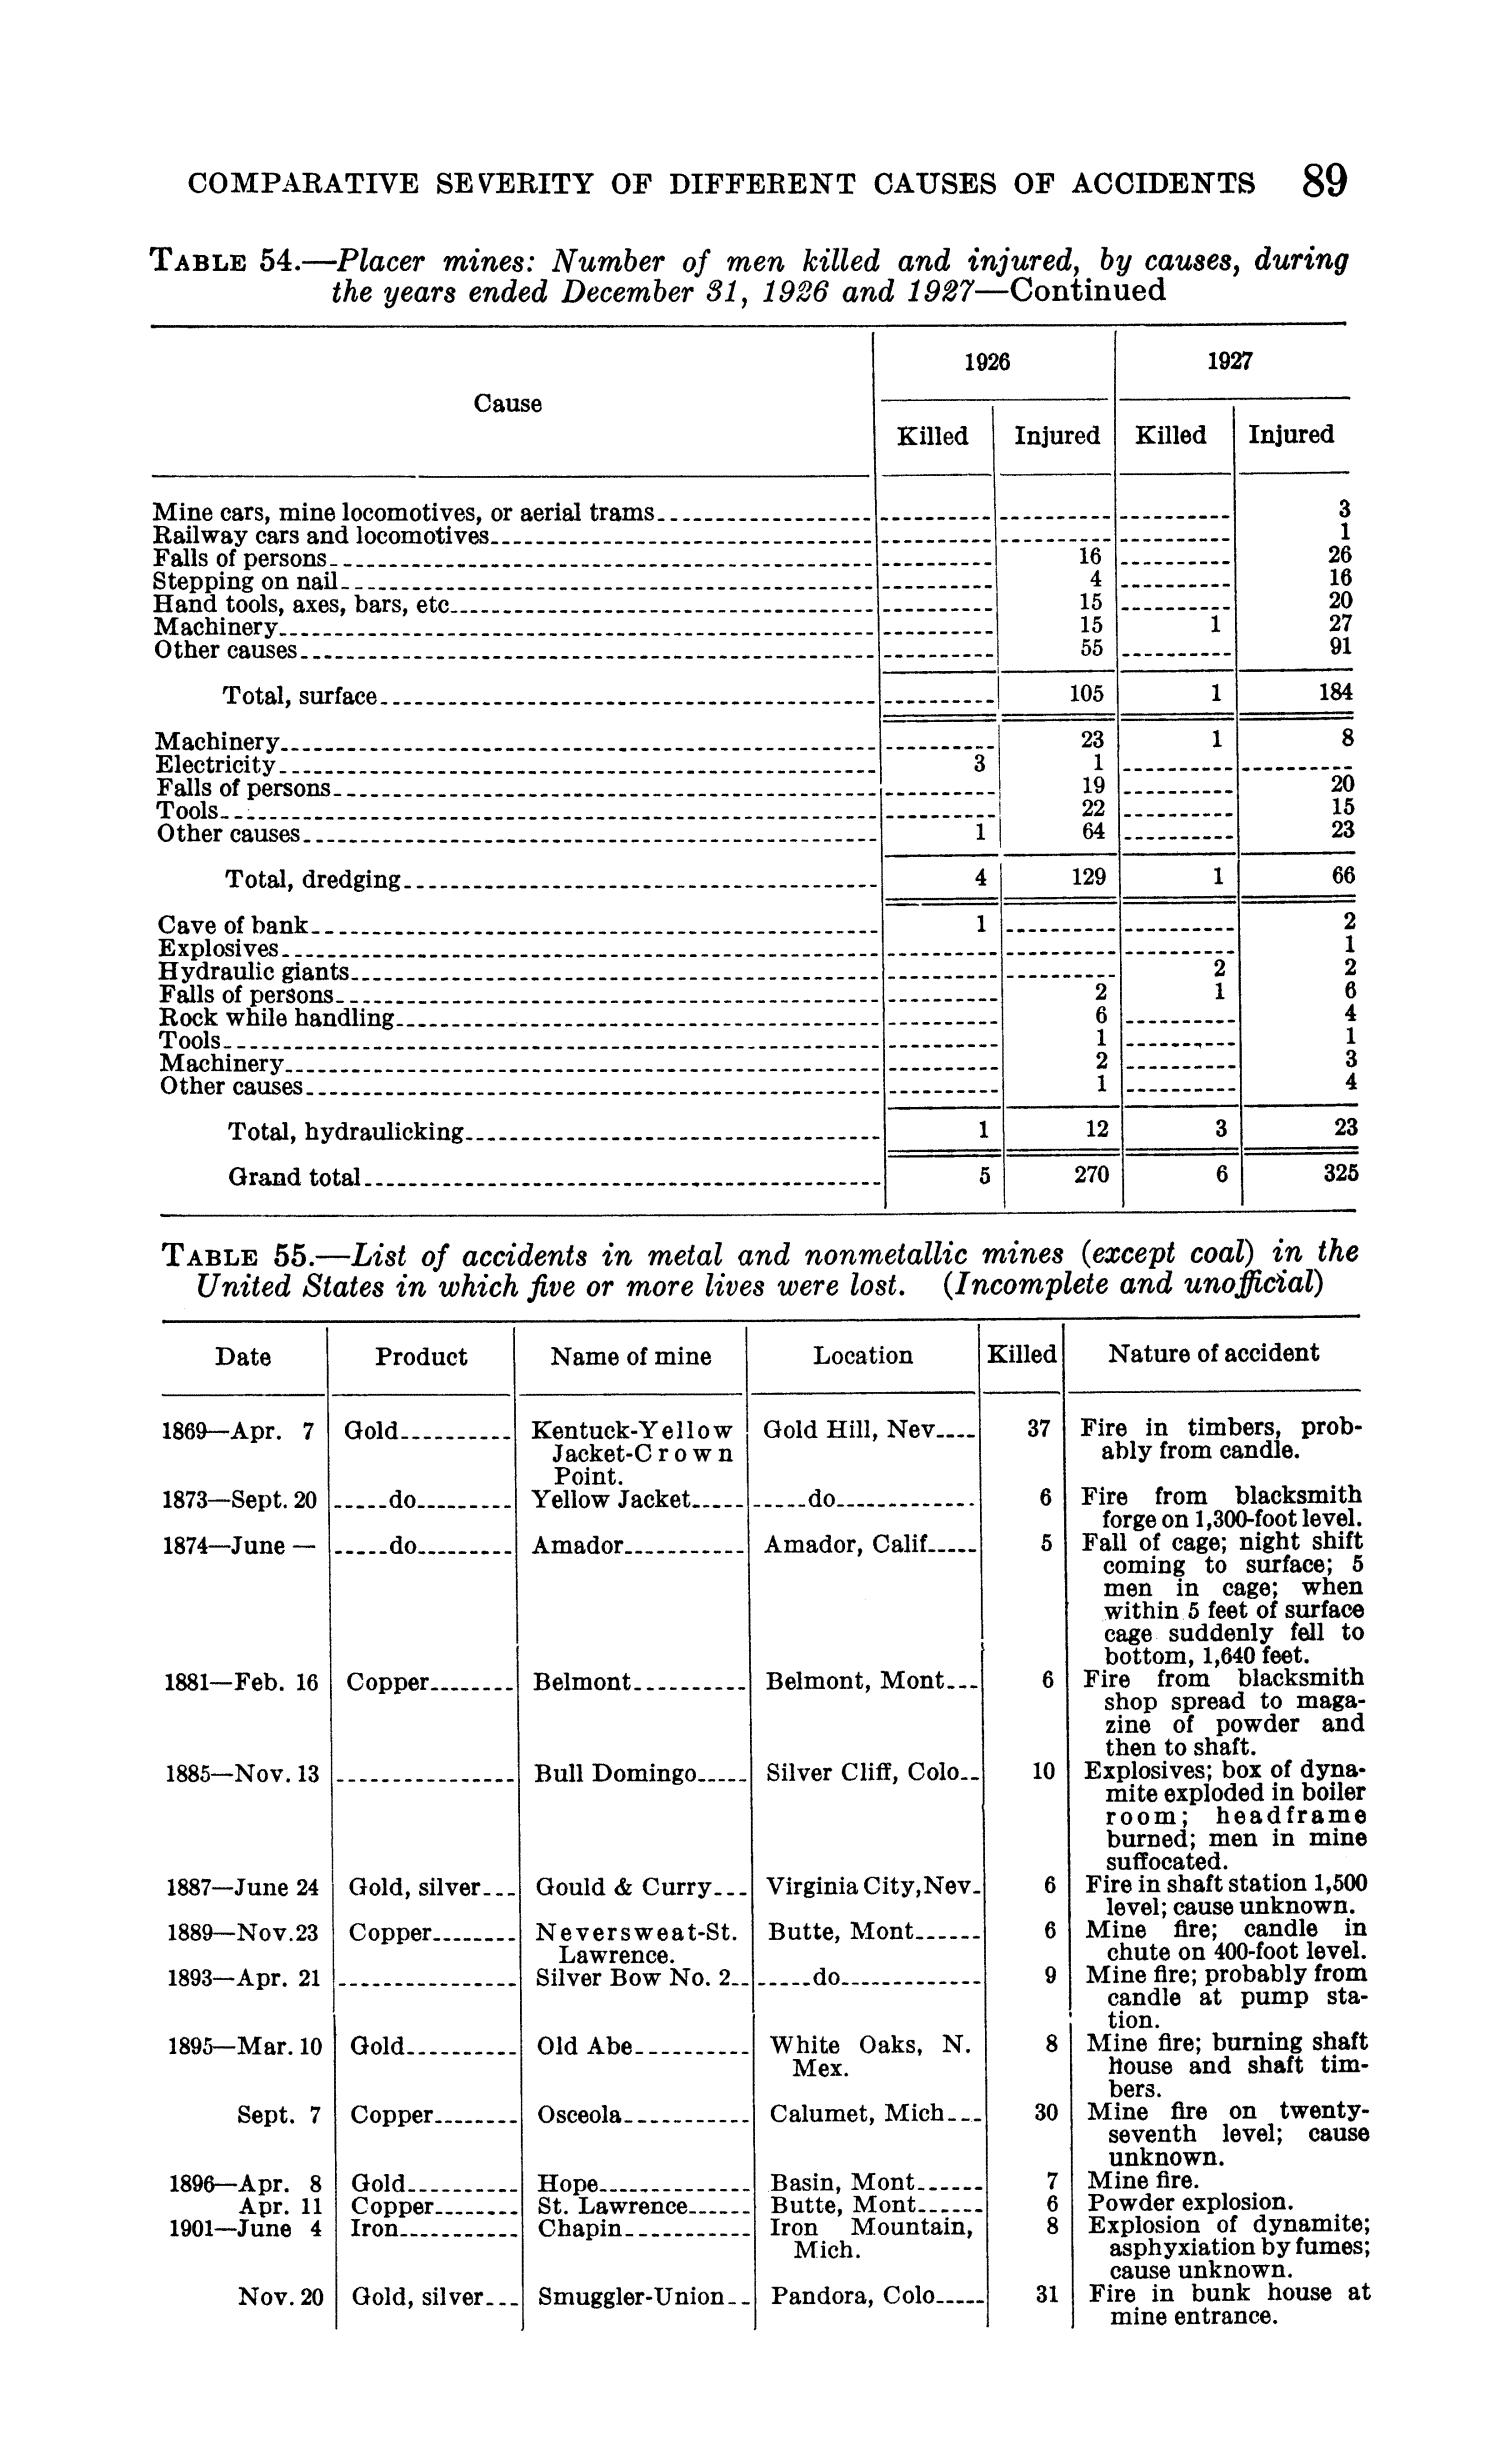 Metal-Mine Accidents in the United States During the Calendar Year 1927
                                                
                                                    89
                                                